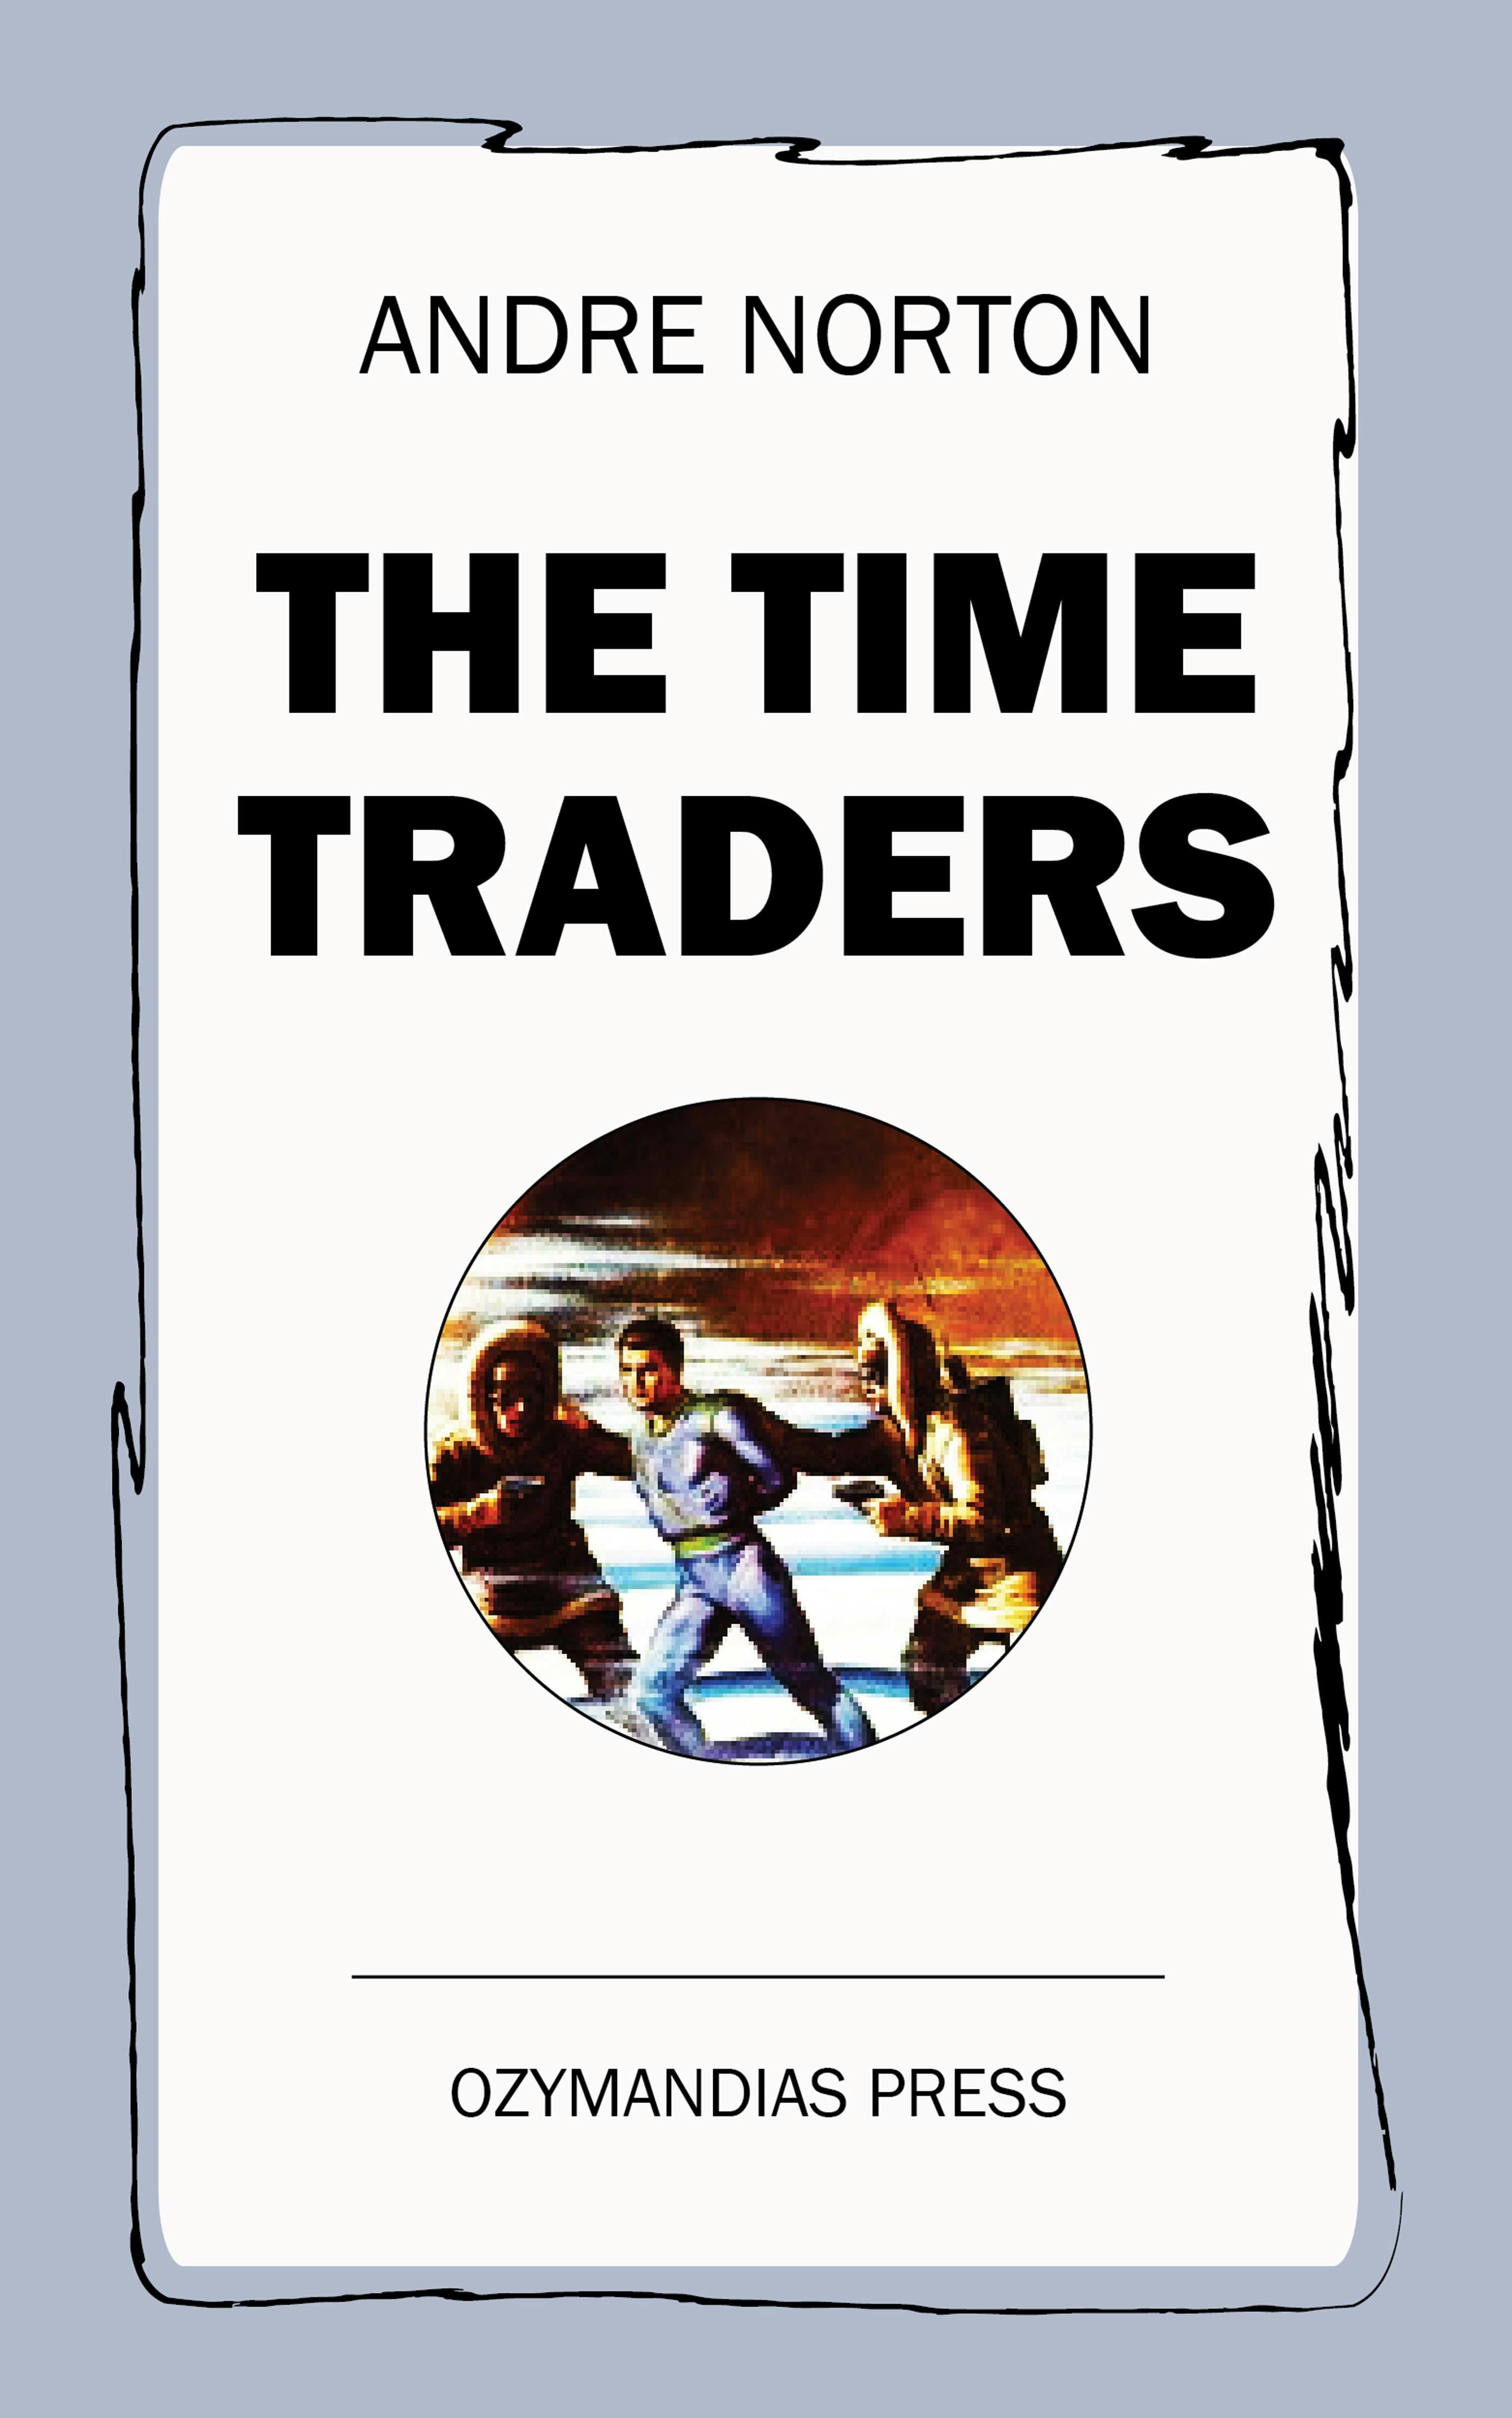 The Time Traders - Andre Norton